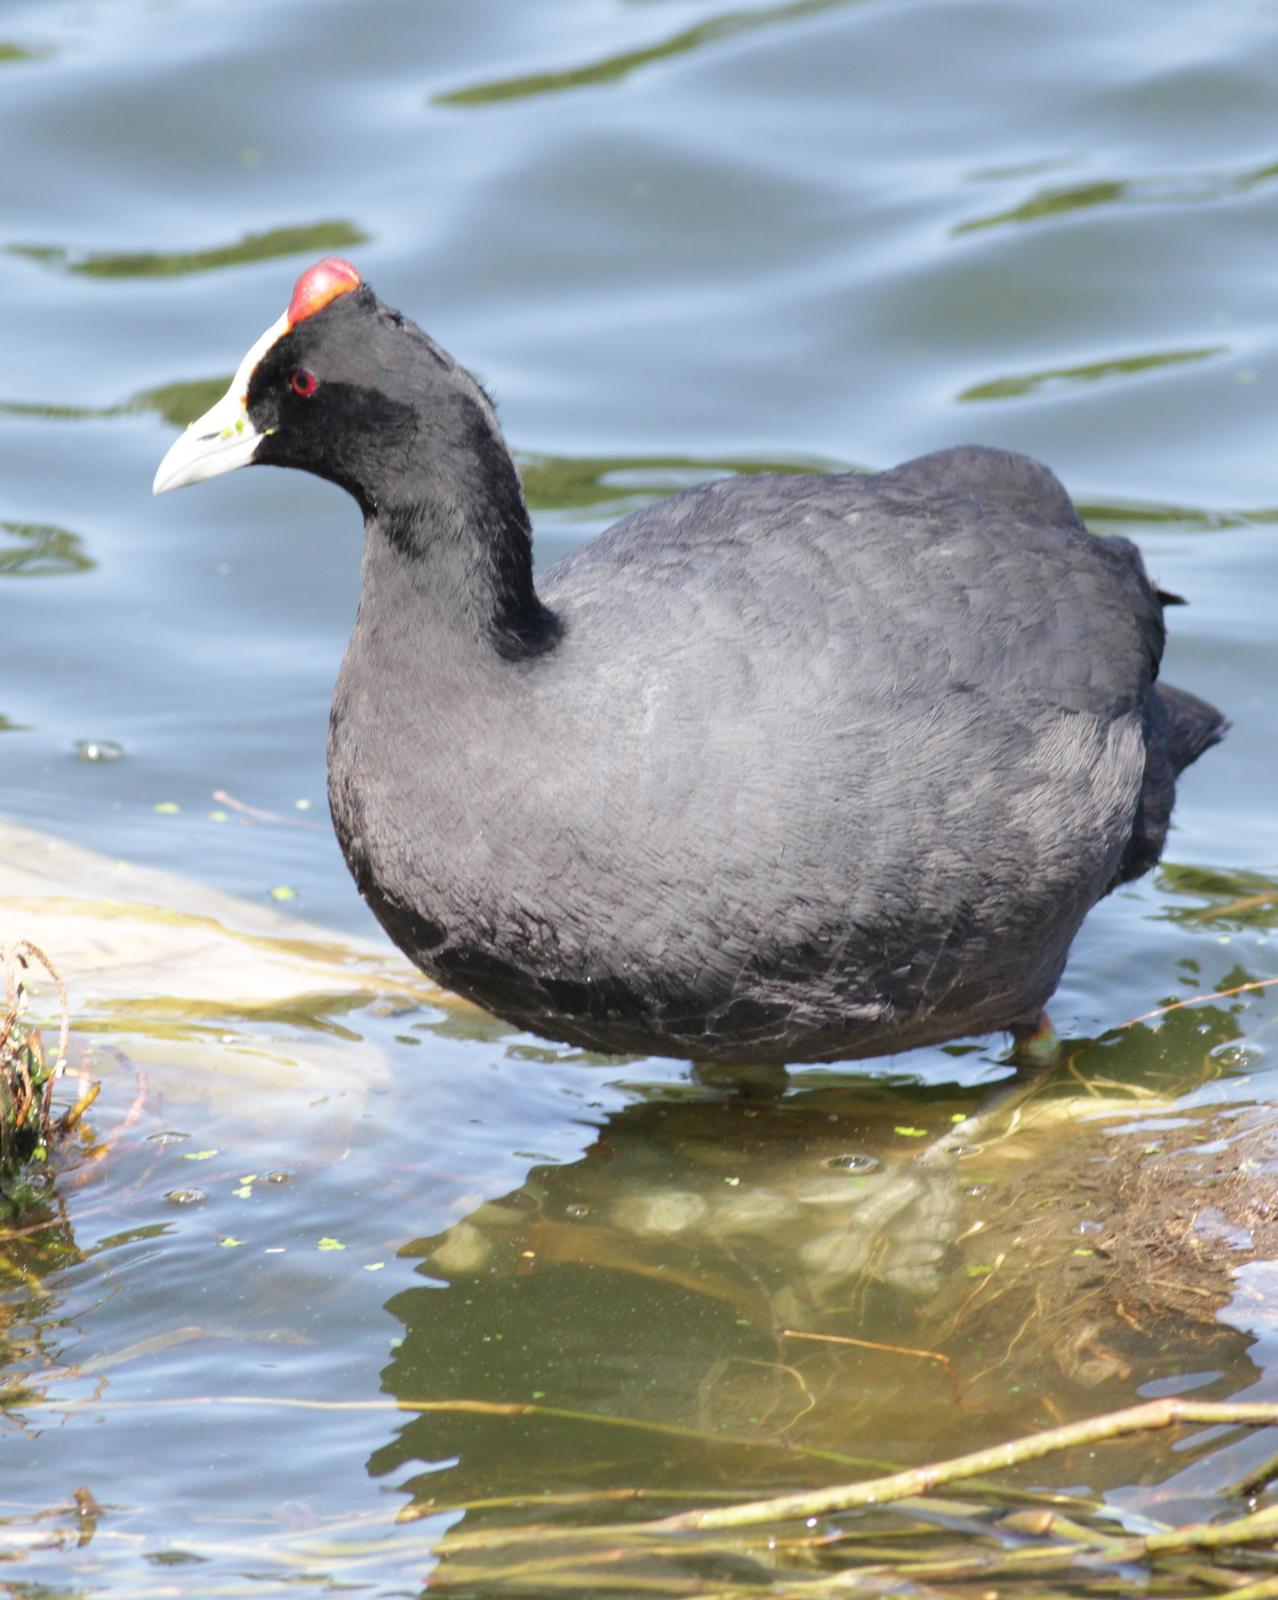 Red-knobbed Coot Photo by Alex Lamoreaux